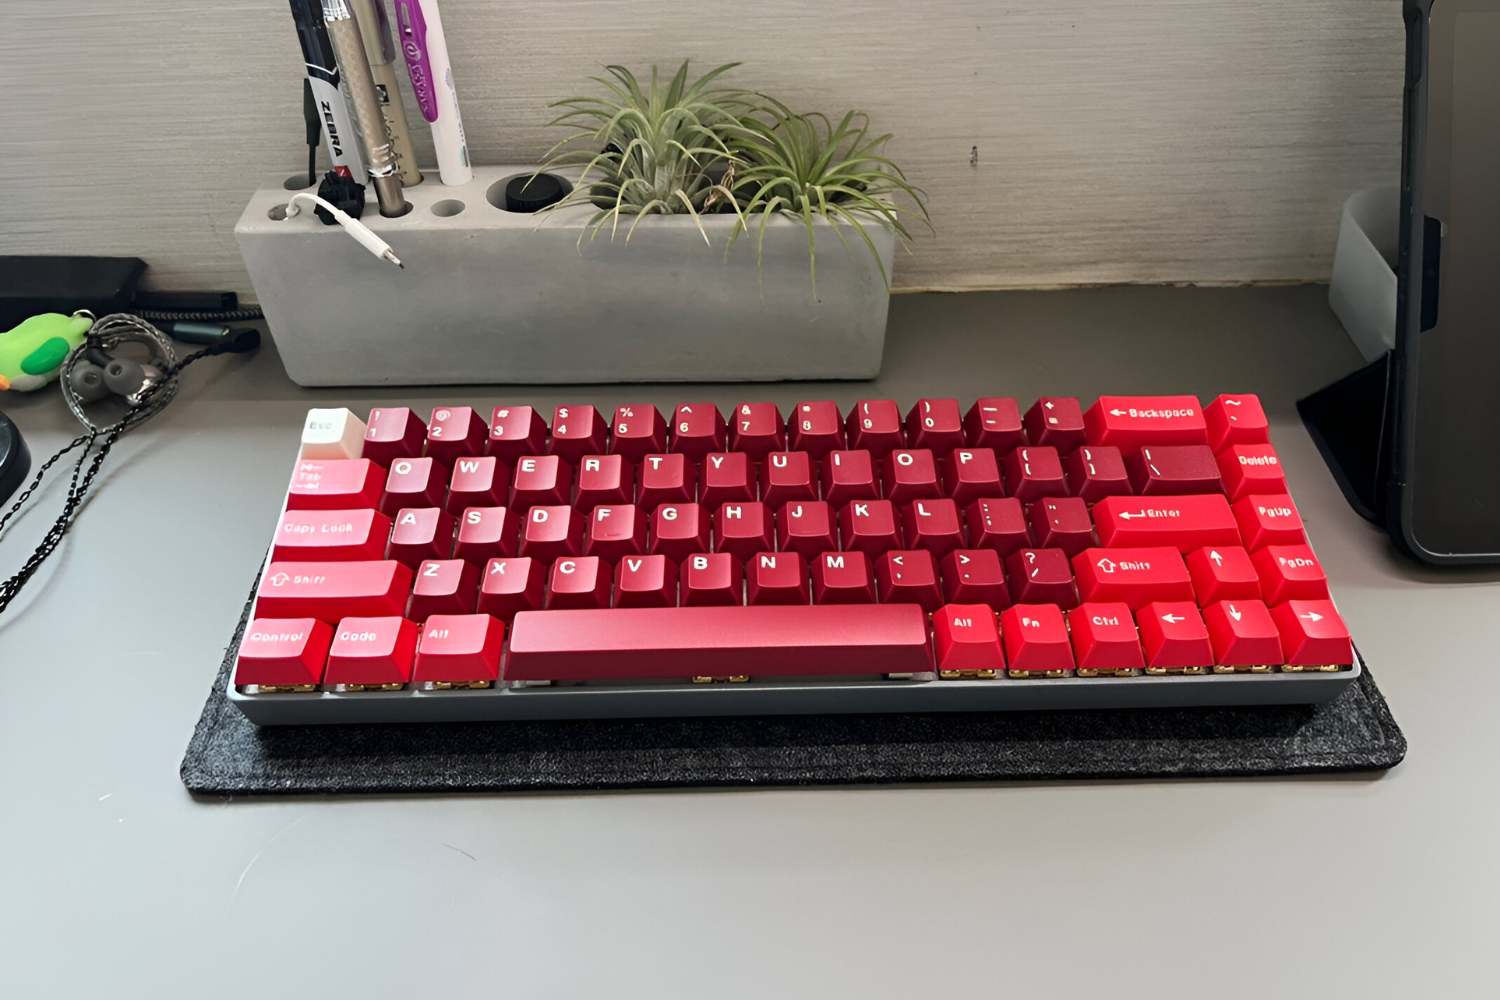 How To Type Slowly On A Mechanical Keyboard Like The Reds